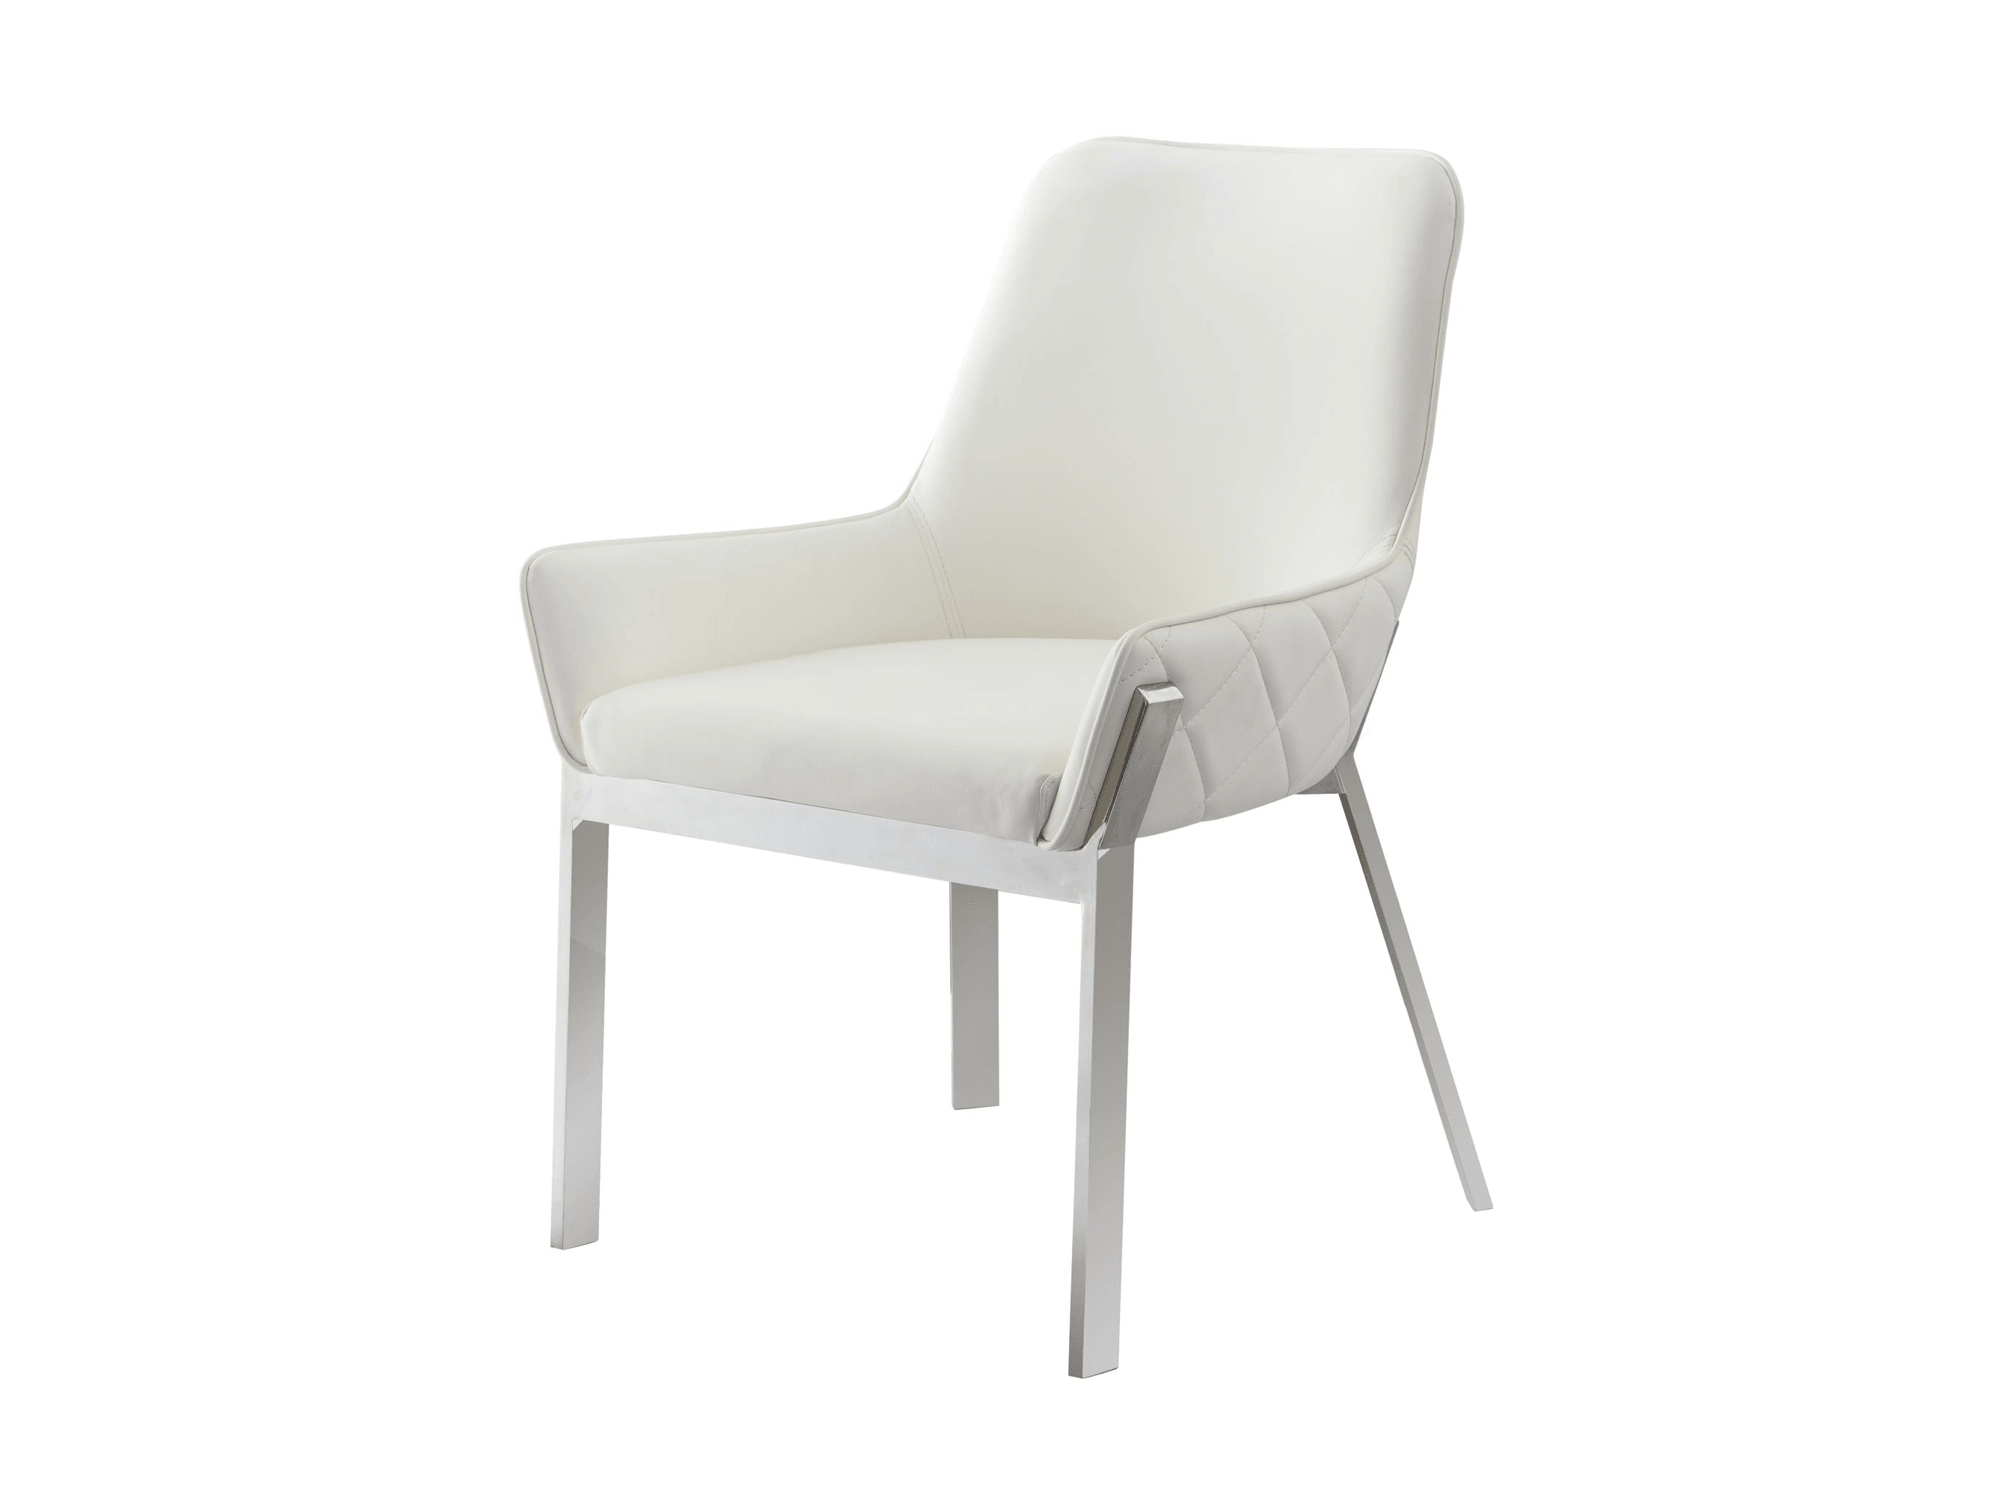 Premier Dining Chair in White - Euro Living Furniture